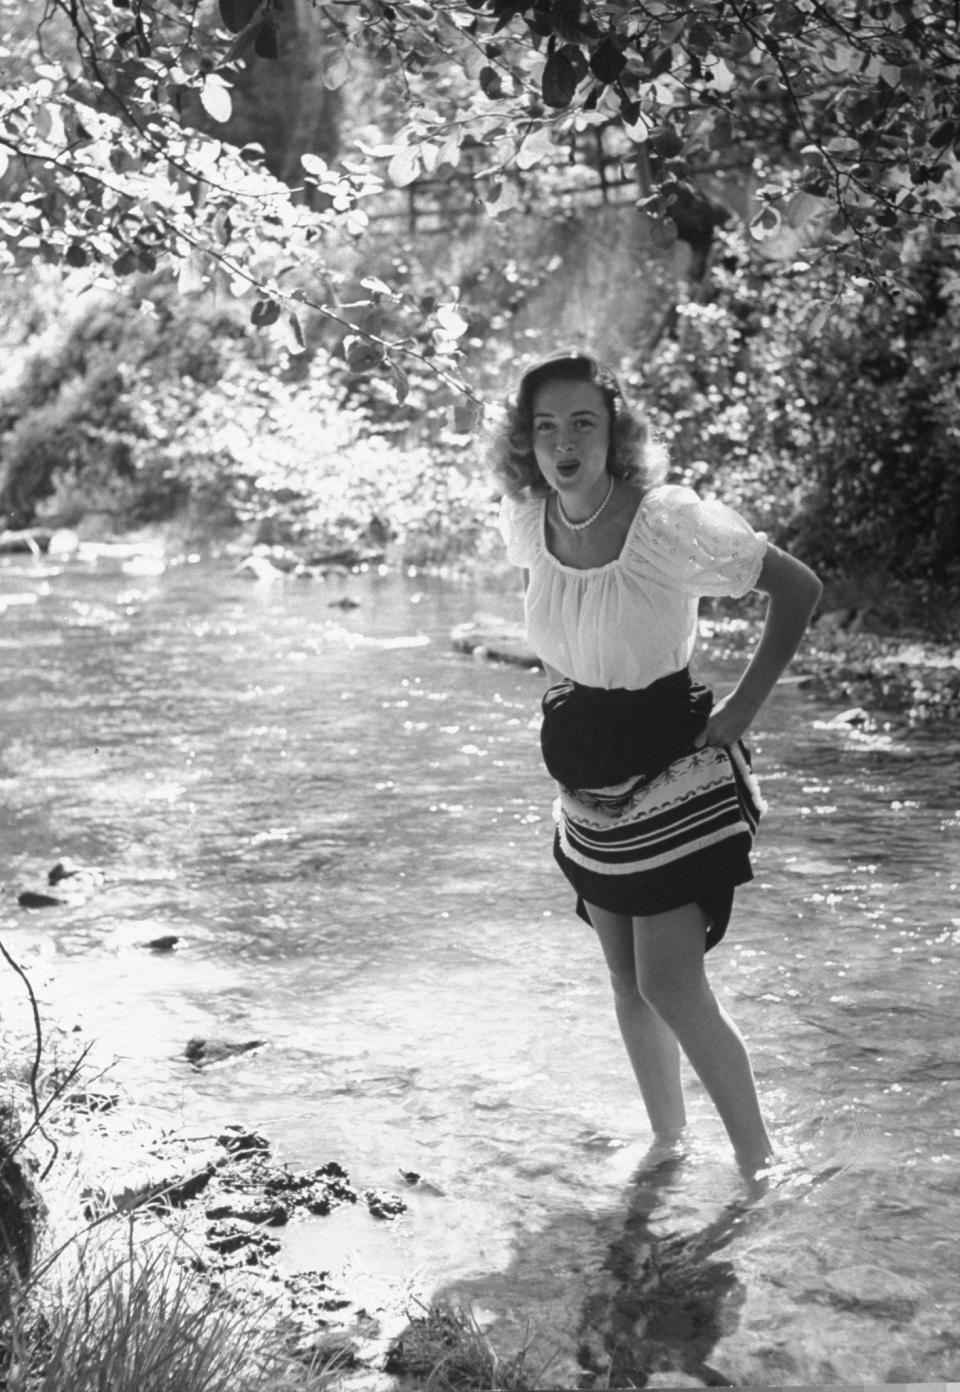 Reed hoisting up her skirt in an undated image as she crosses Saratoga Creek, a fishing spot in Santa Clara County, California.&nbsp;